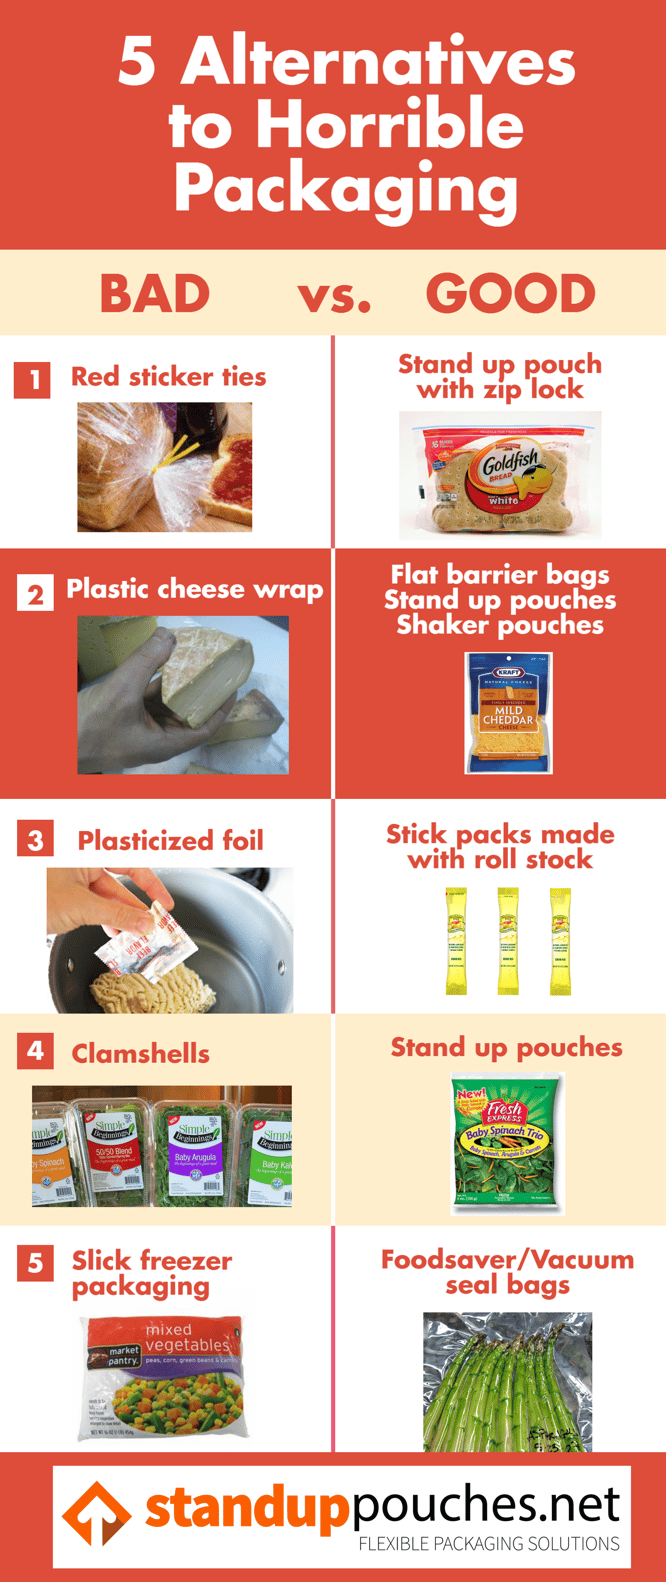 5 Alternatives to Horrible Packaging Infographic